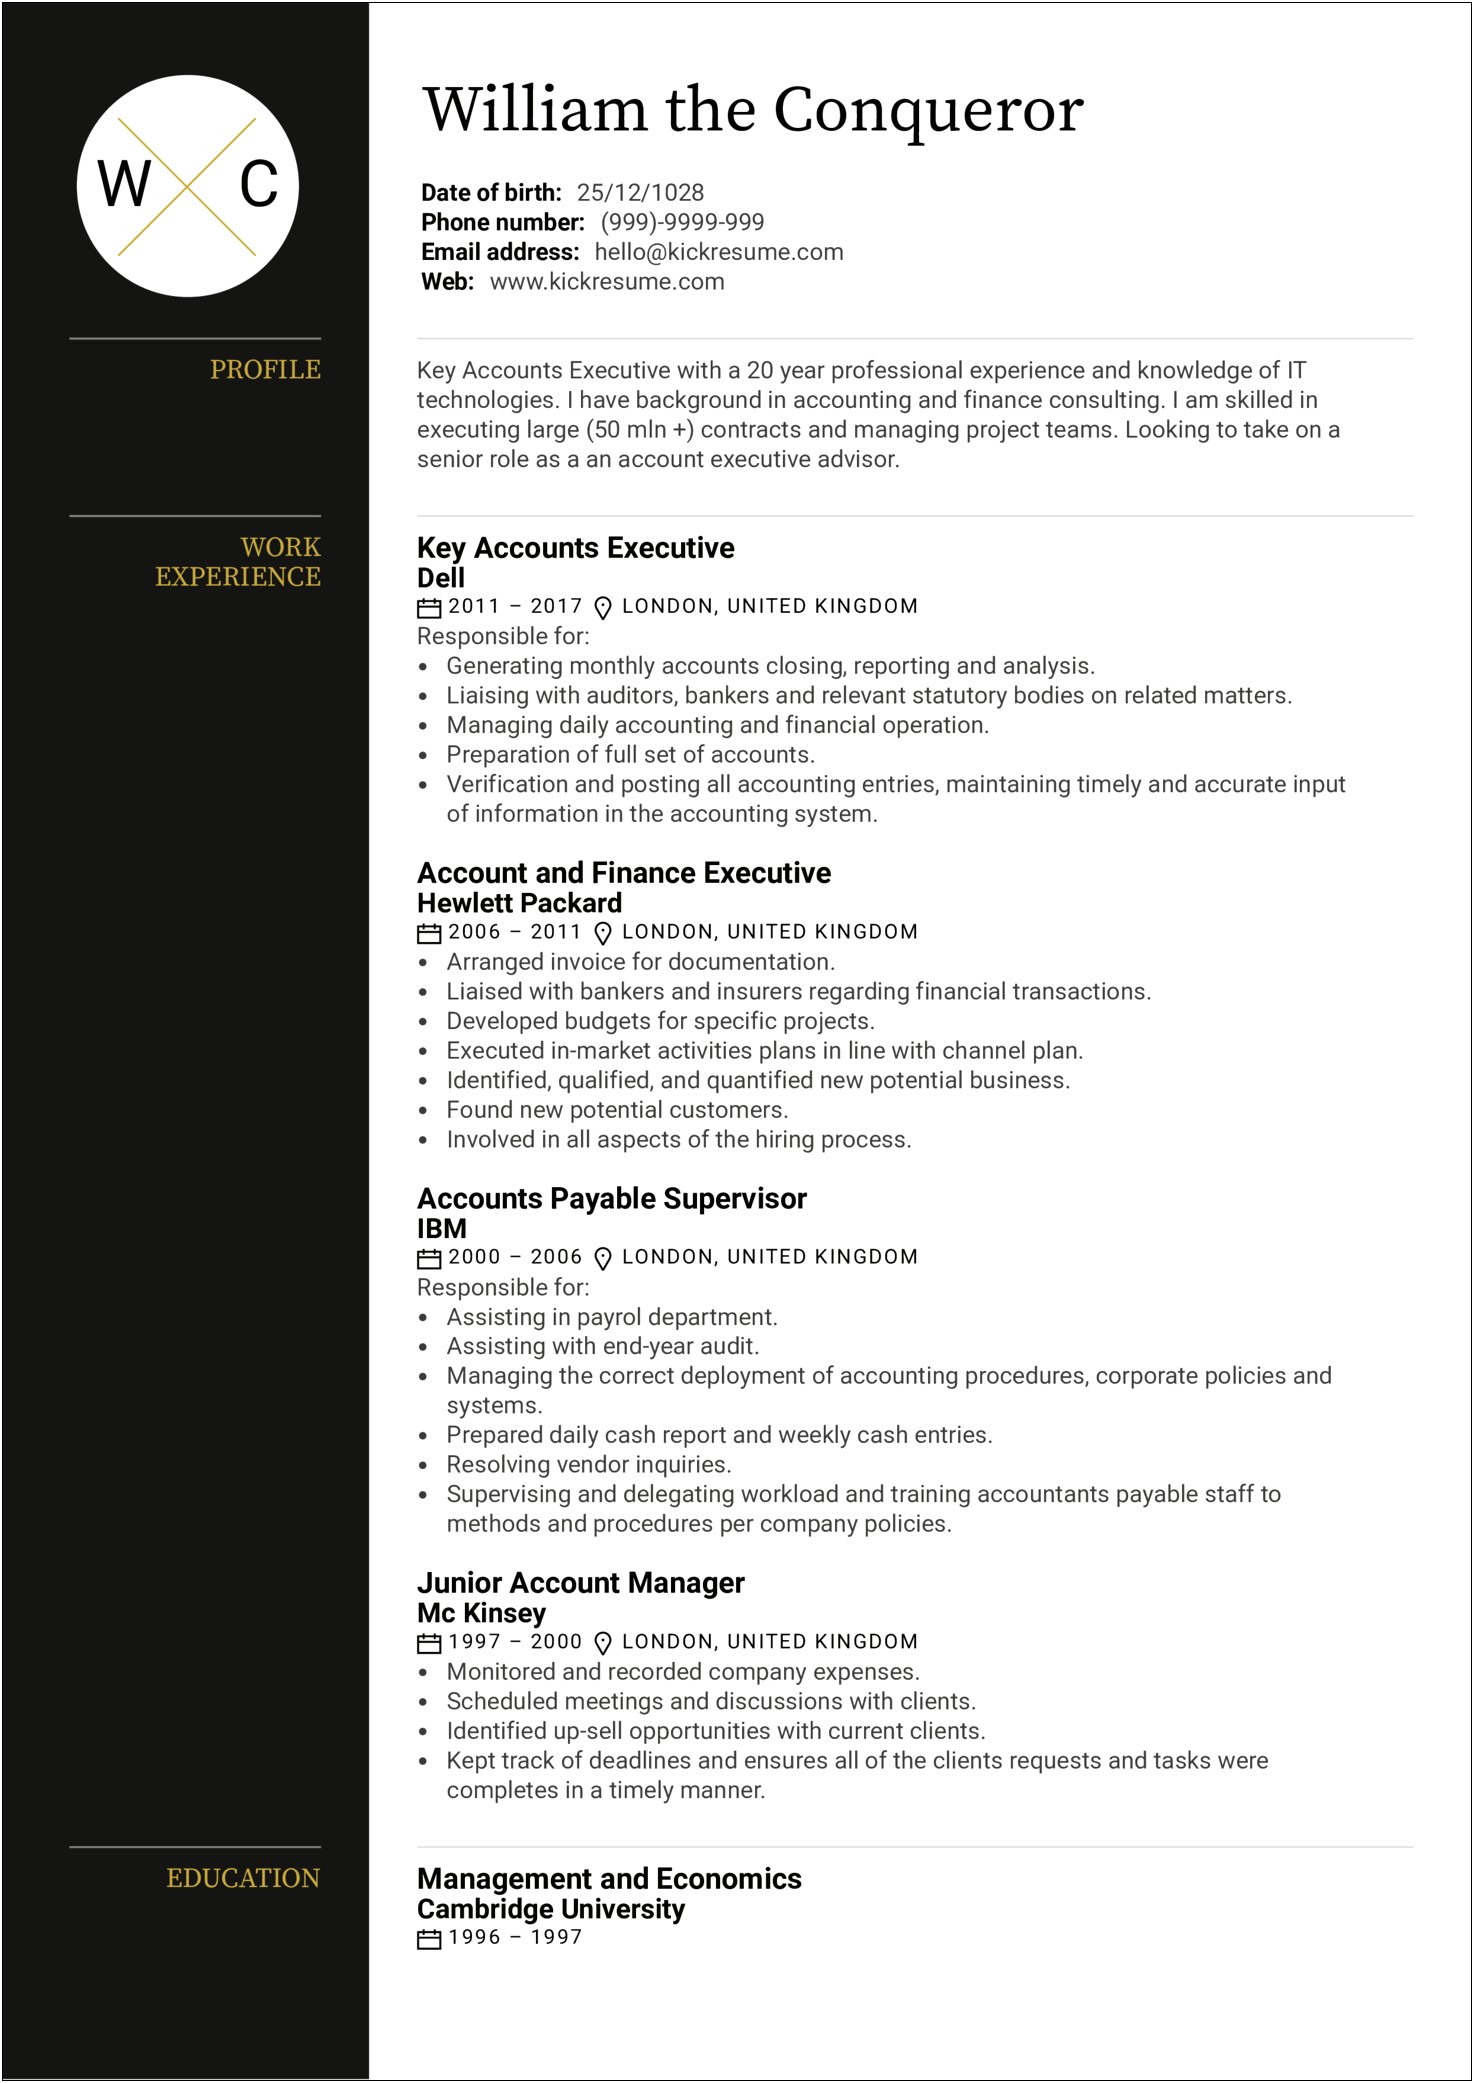 Marketing And Management Resume 12 Years Of Expereince